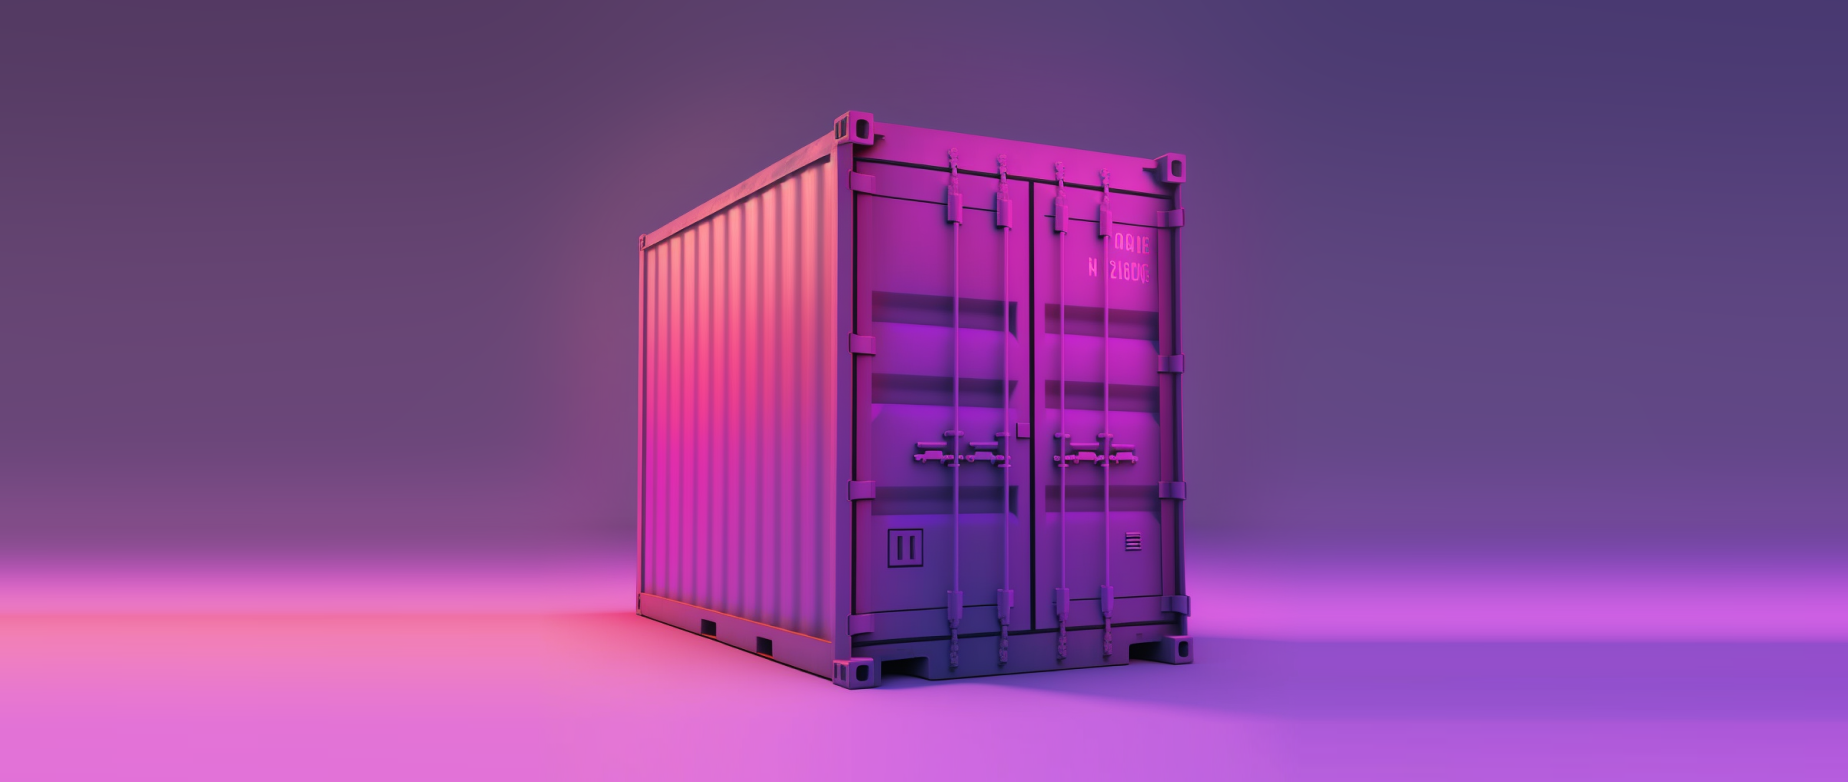 A cargo container with a purple light shining on it.